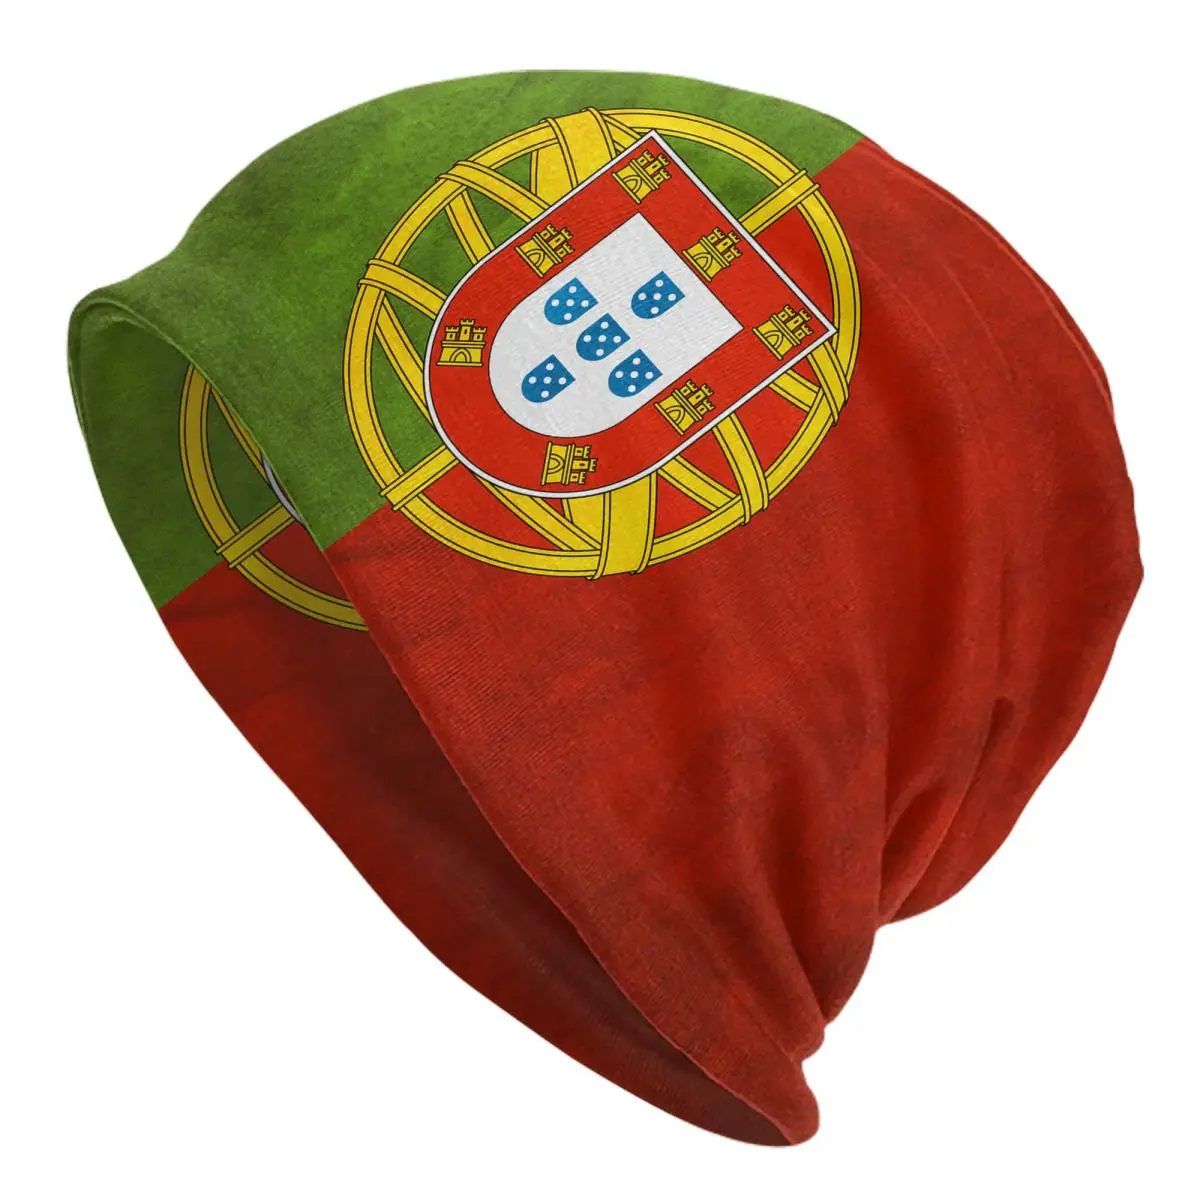 Portugal Flag Adult Men's Women's Knit Hat Keep warm winter Funny knitted hat